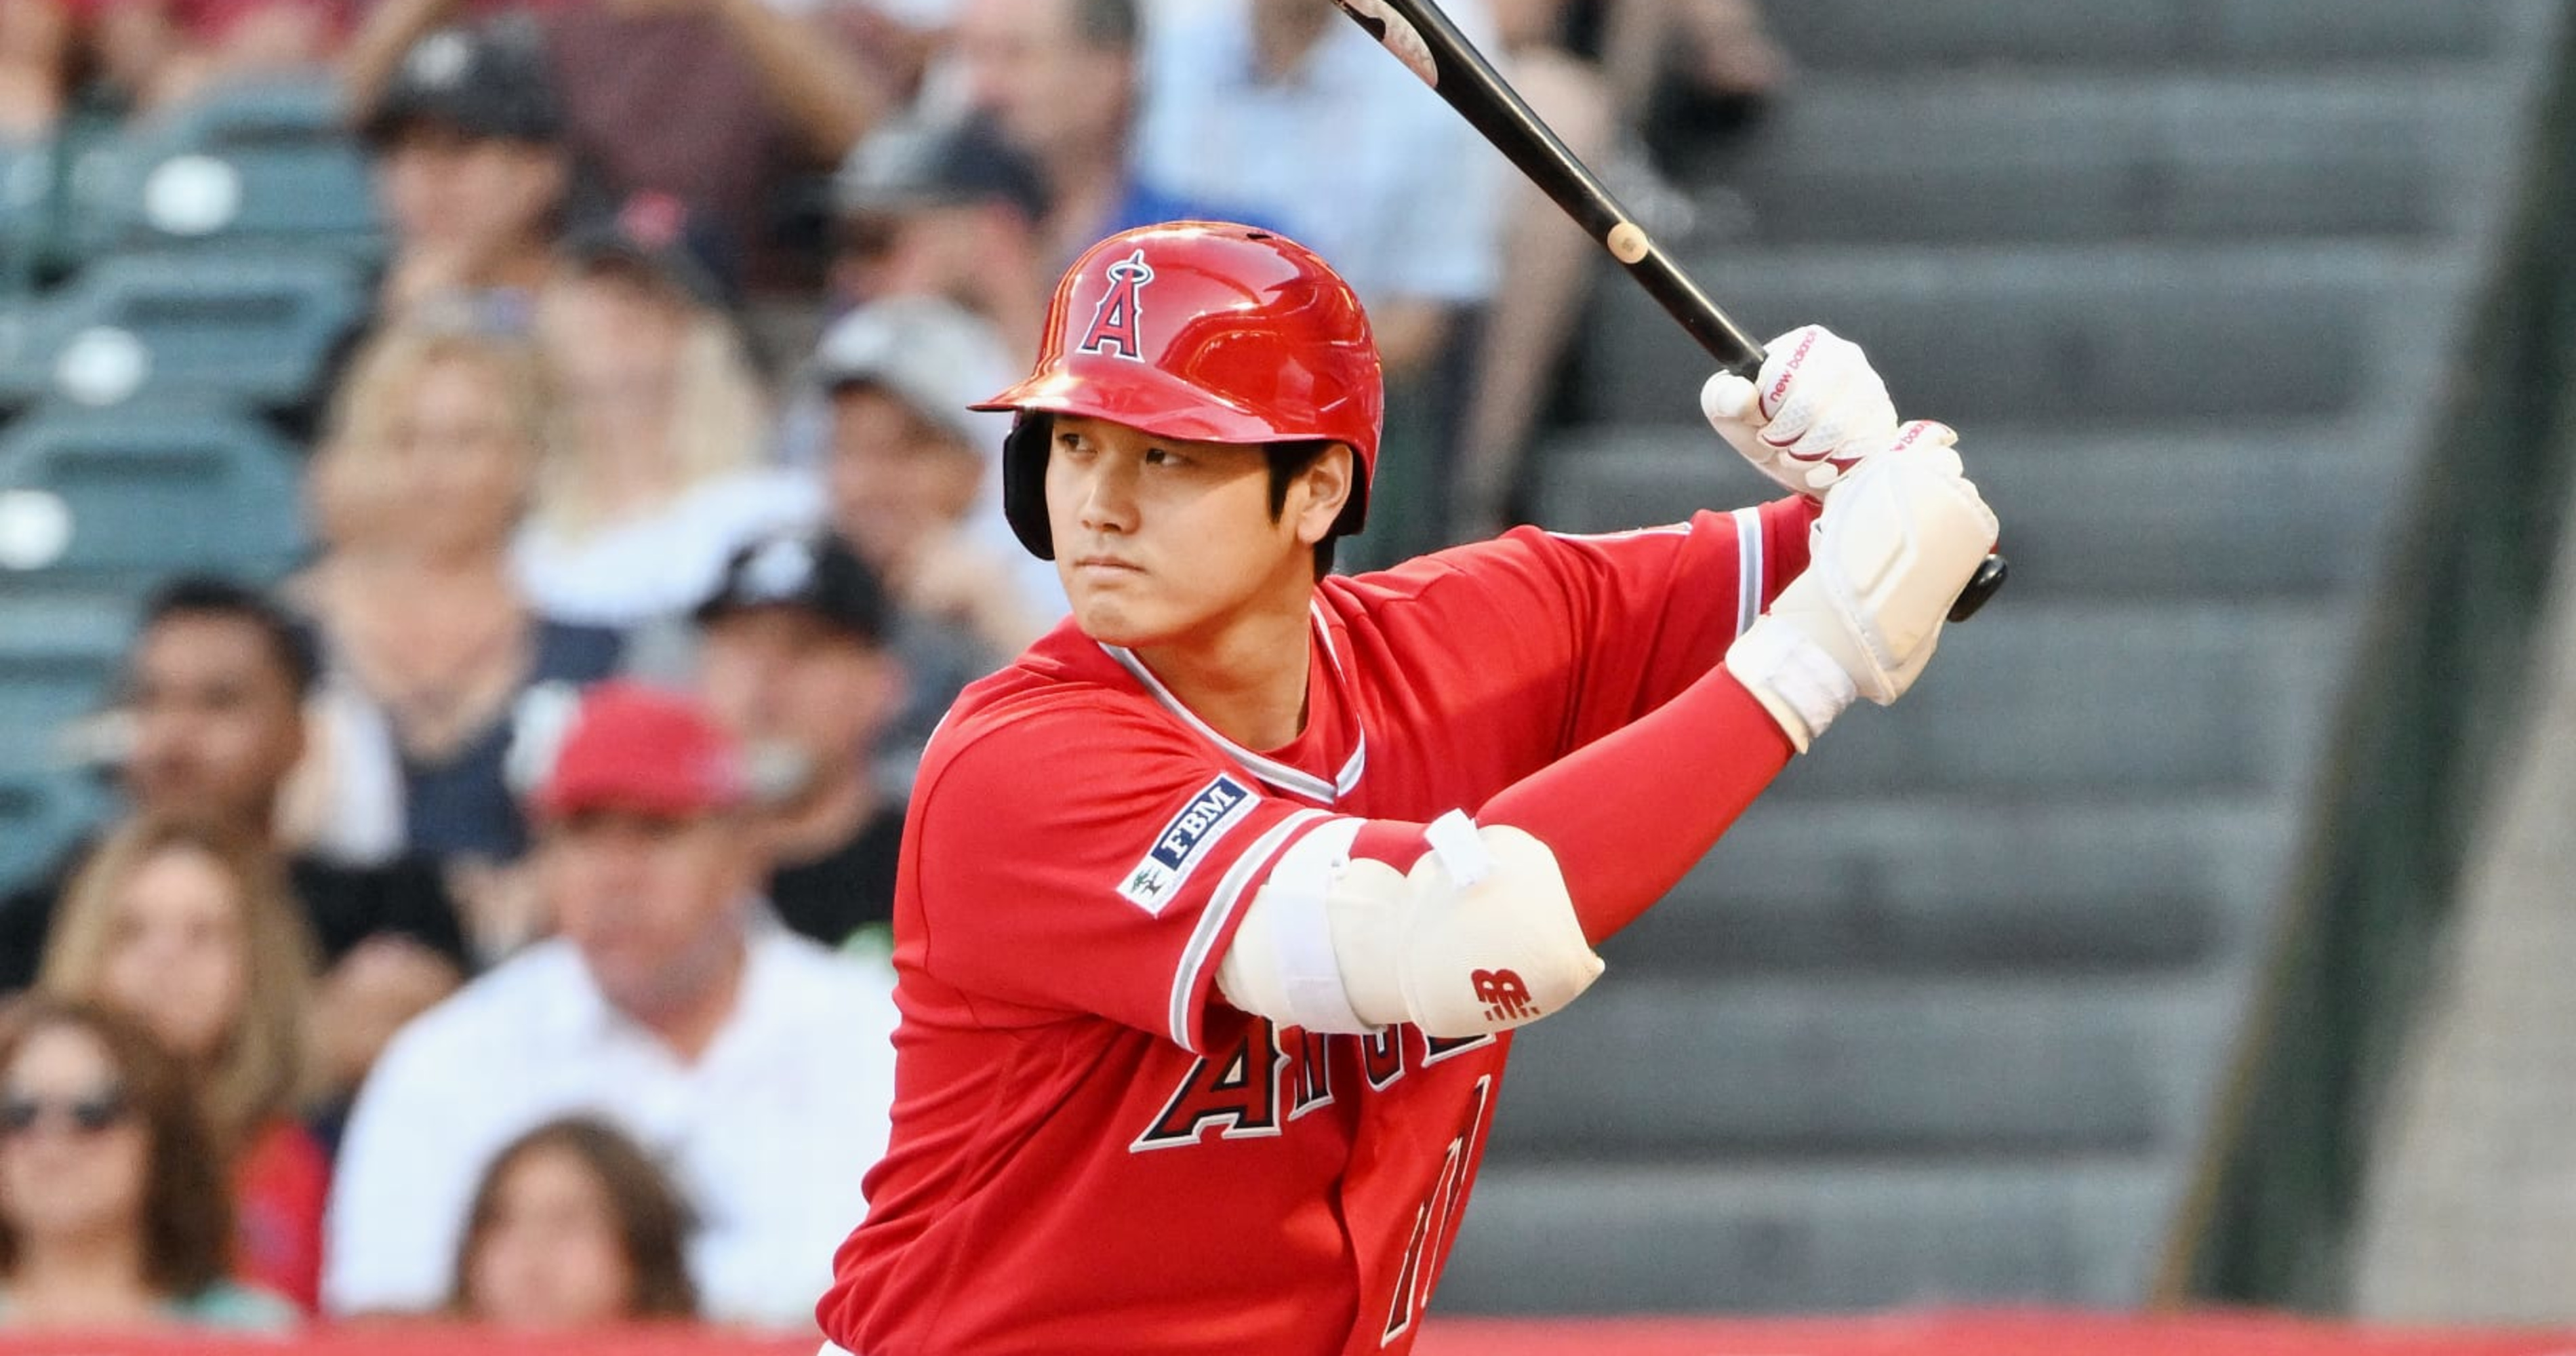 7 Teams That Become World Series Contenders with a Shohei Ohtani